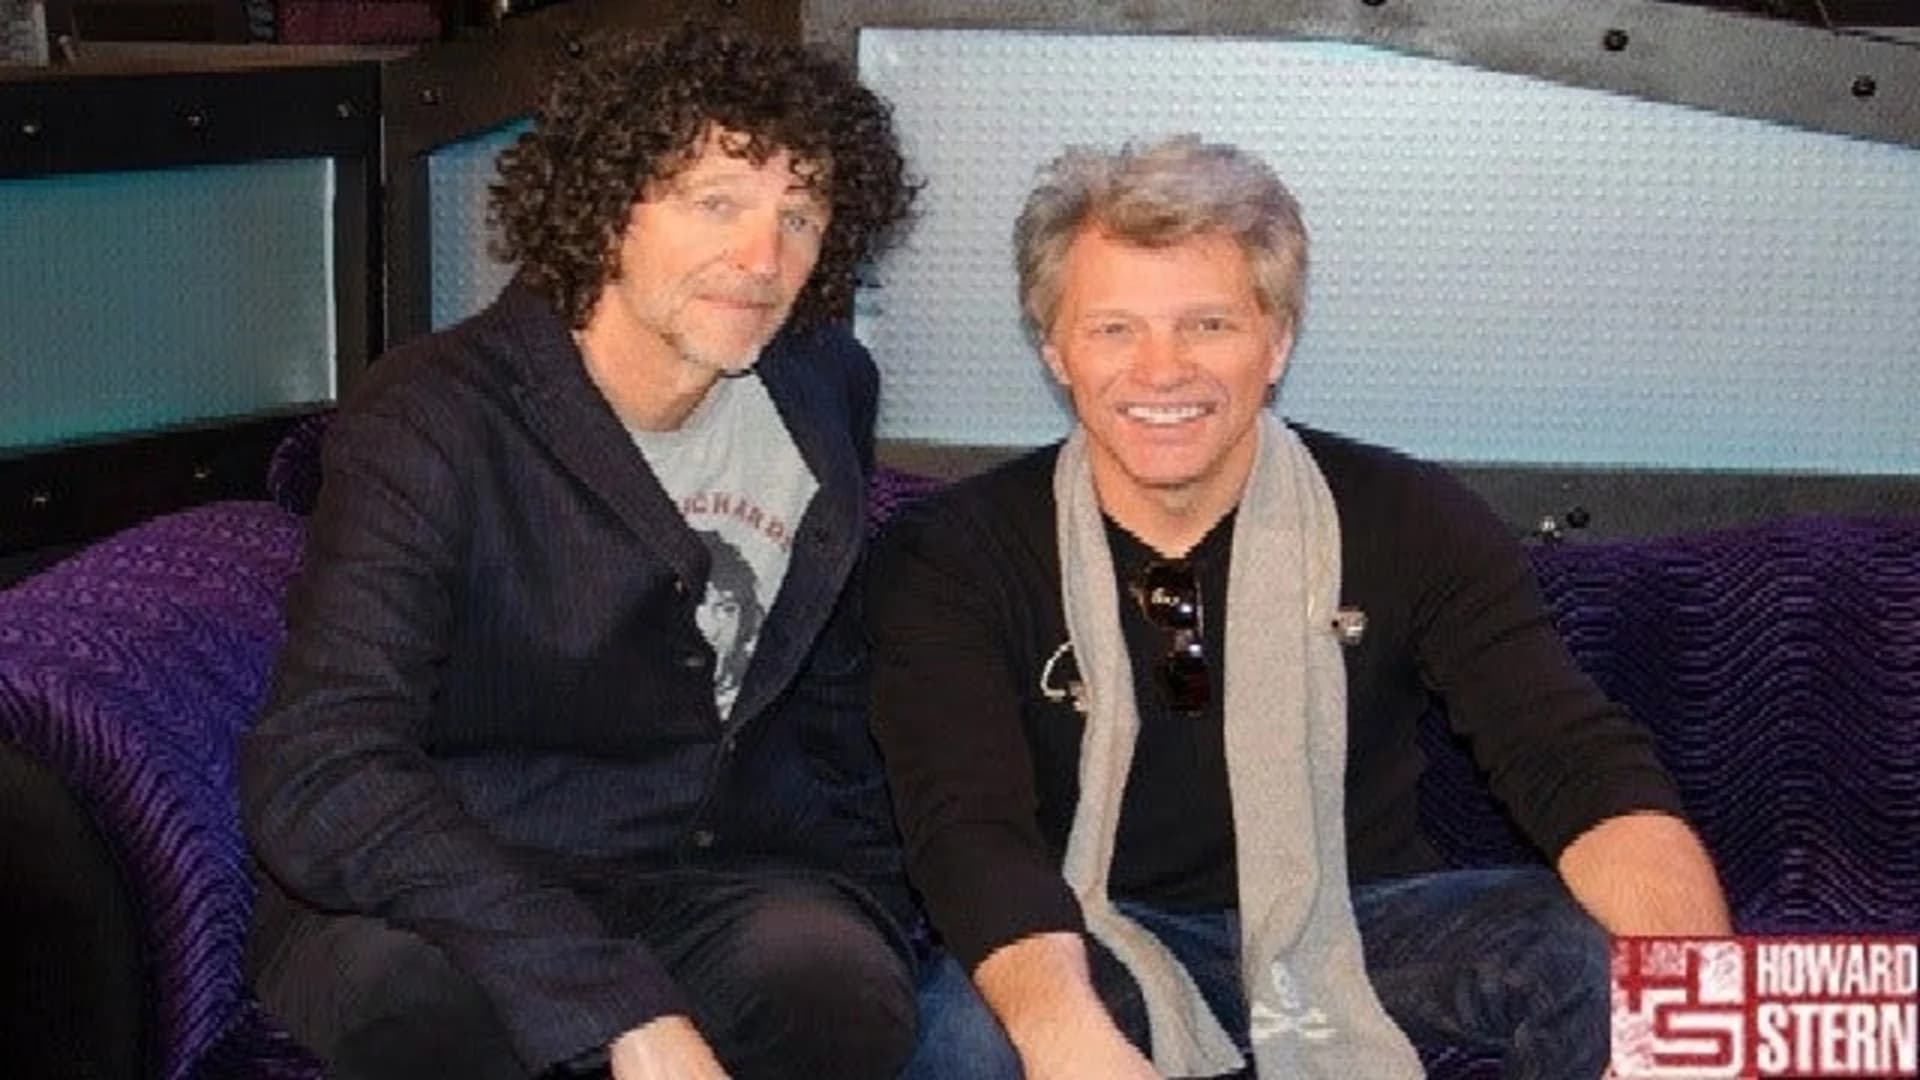 Howard Stern to induct Bon Jovi into Rock and Roll HOF